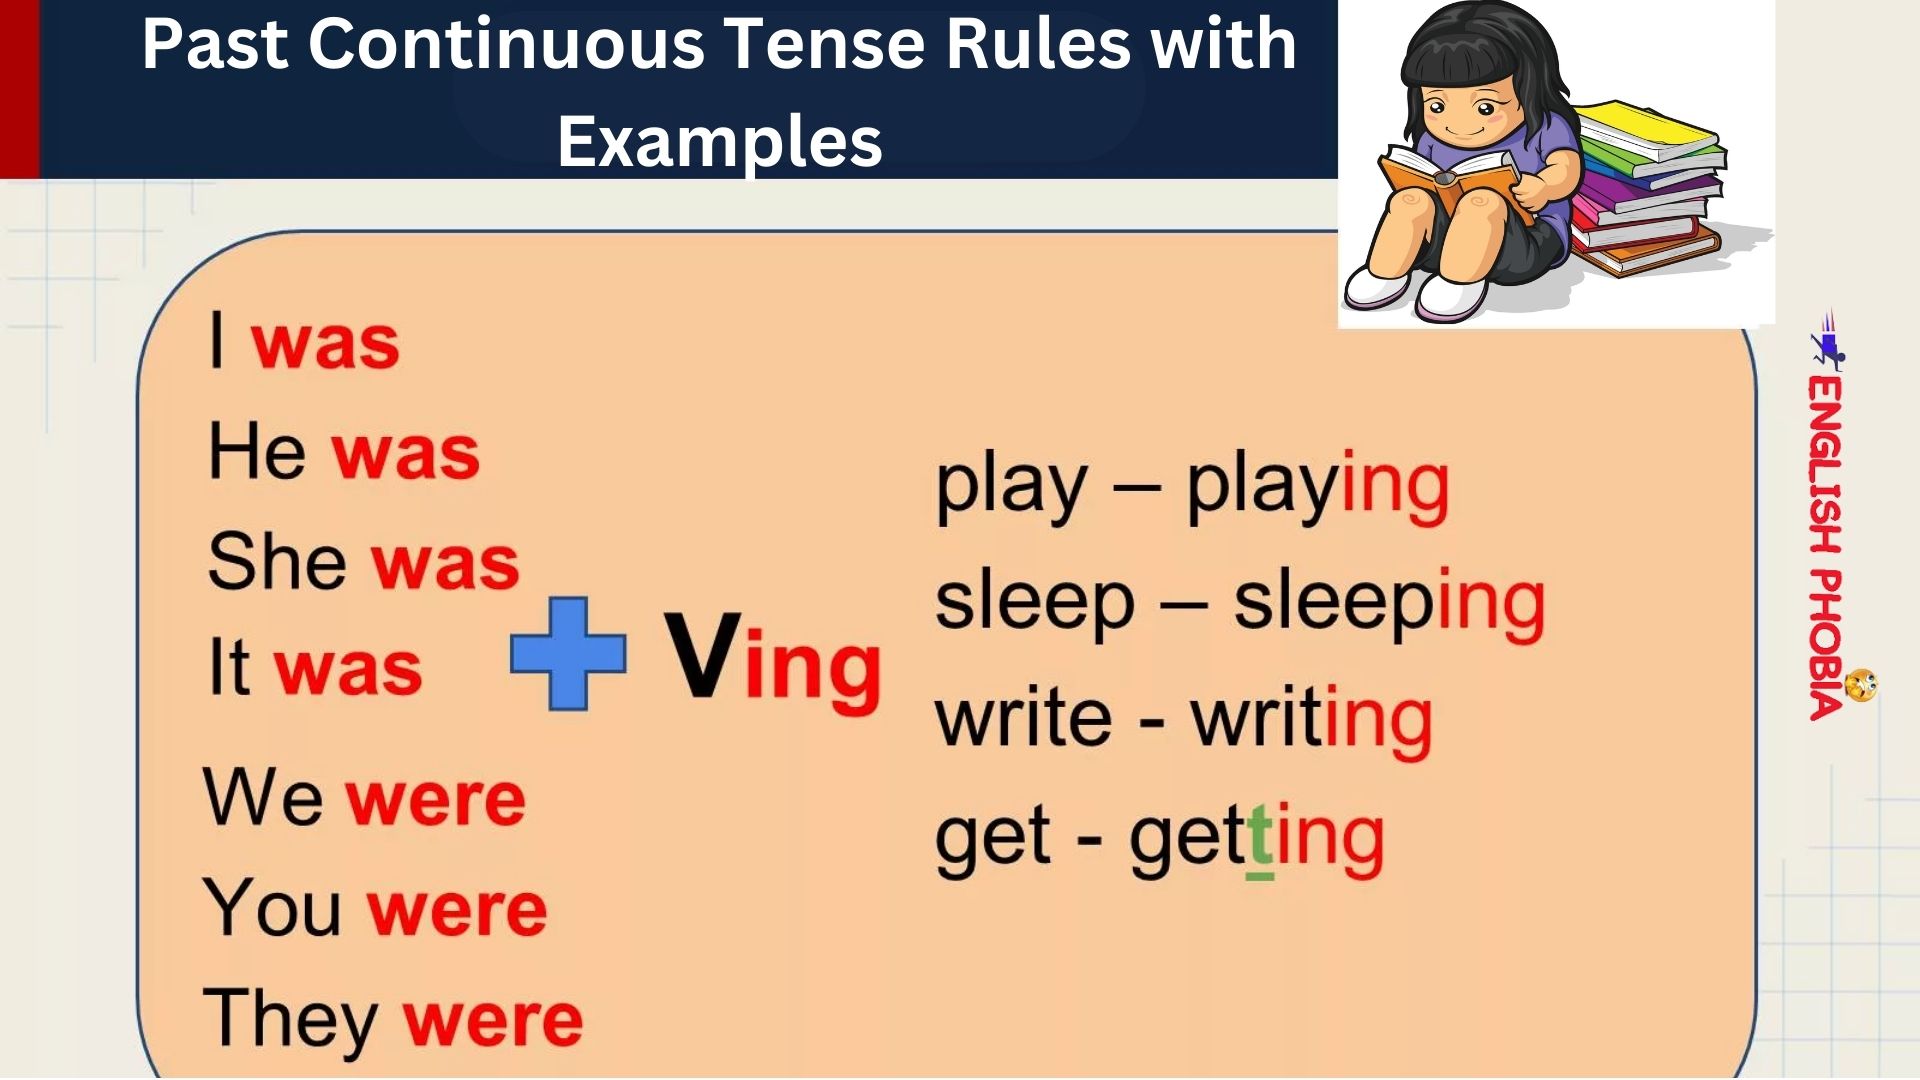 past-continuous-tense-rules-with-examples